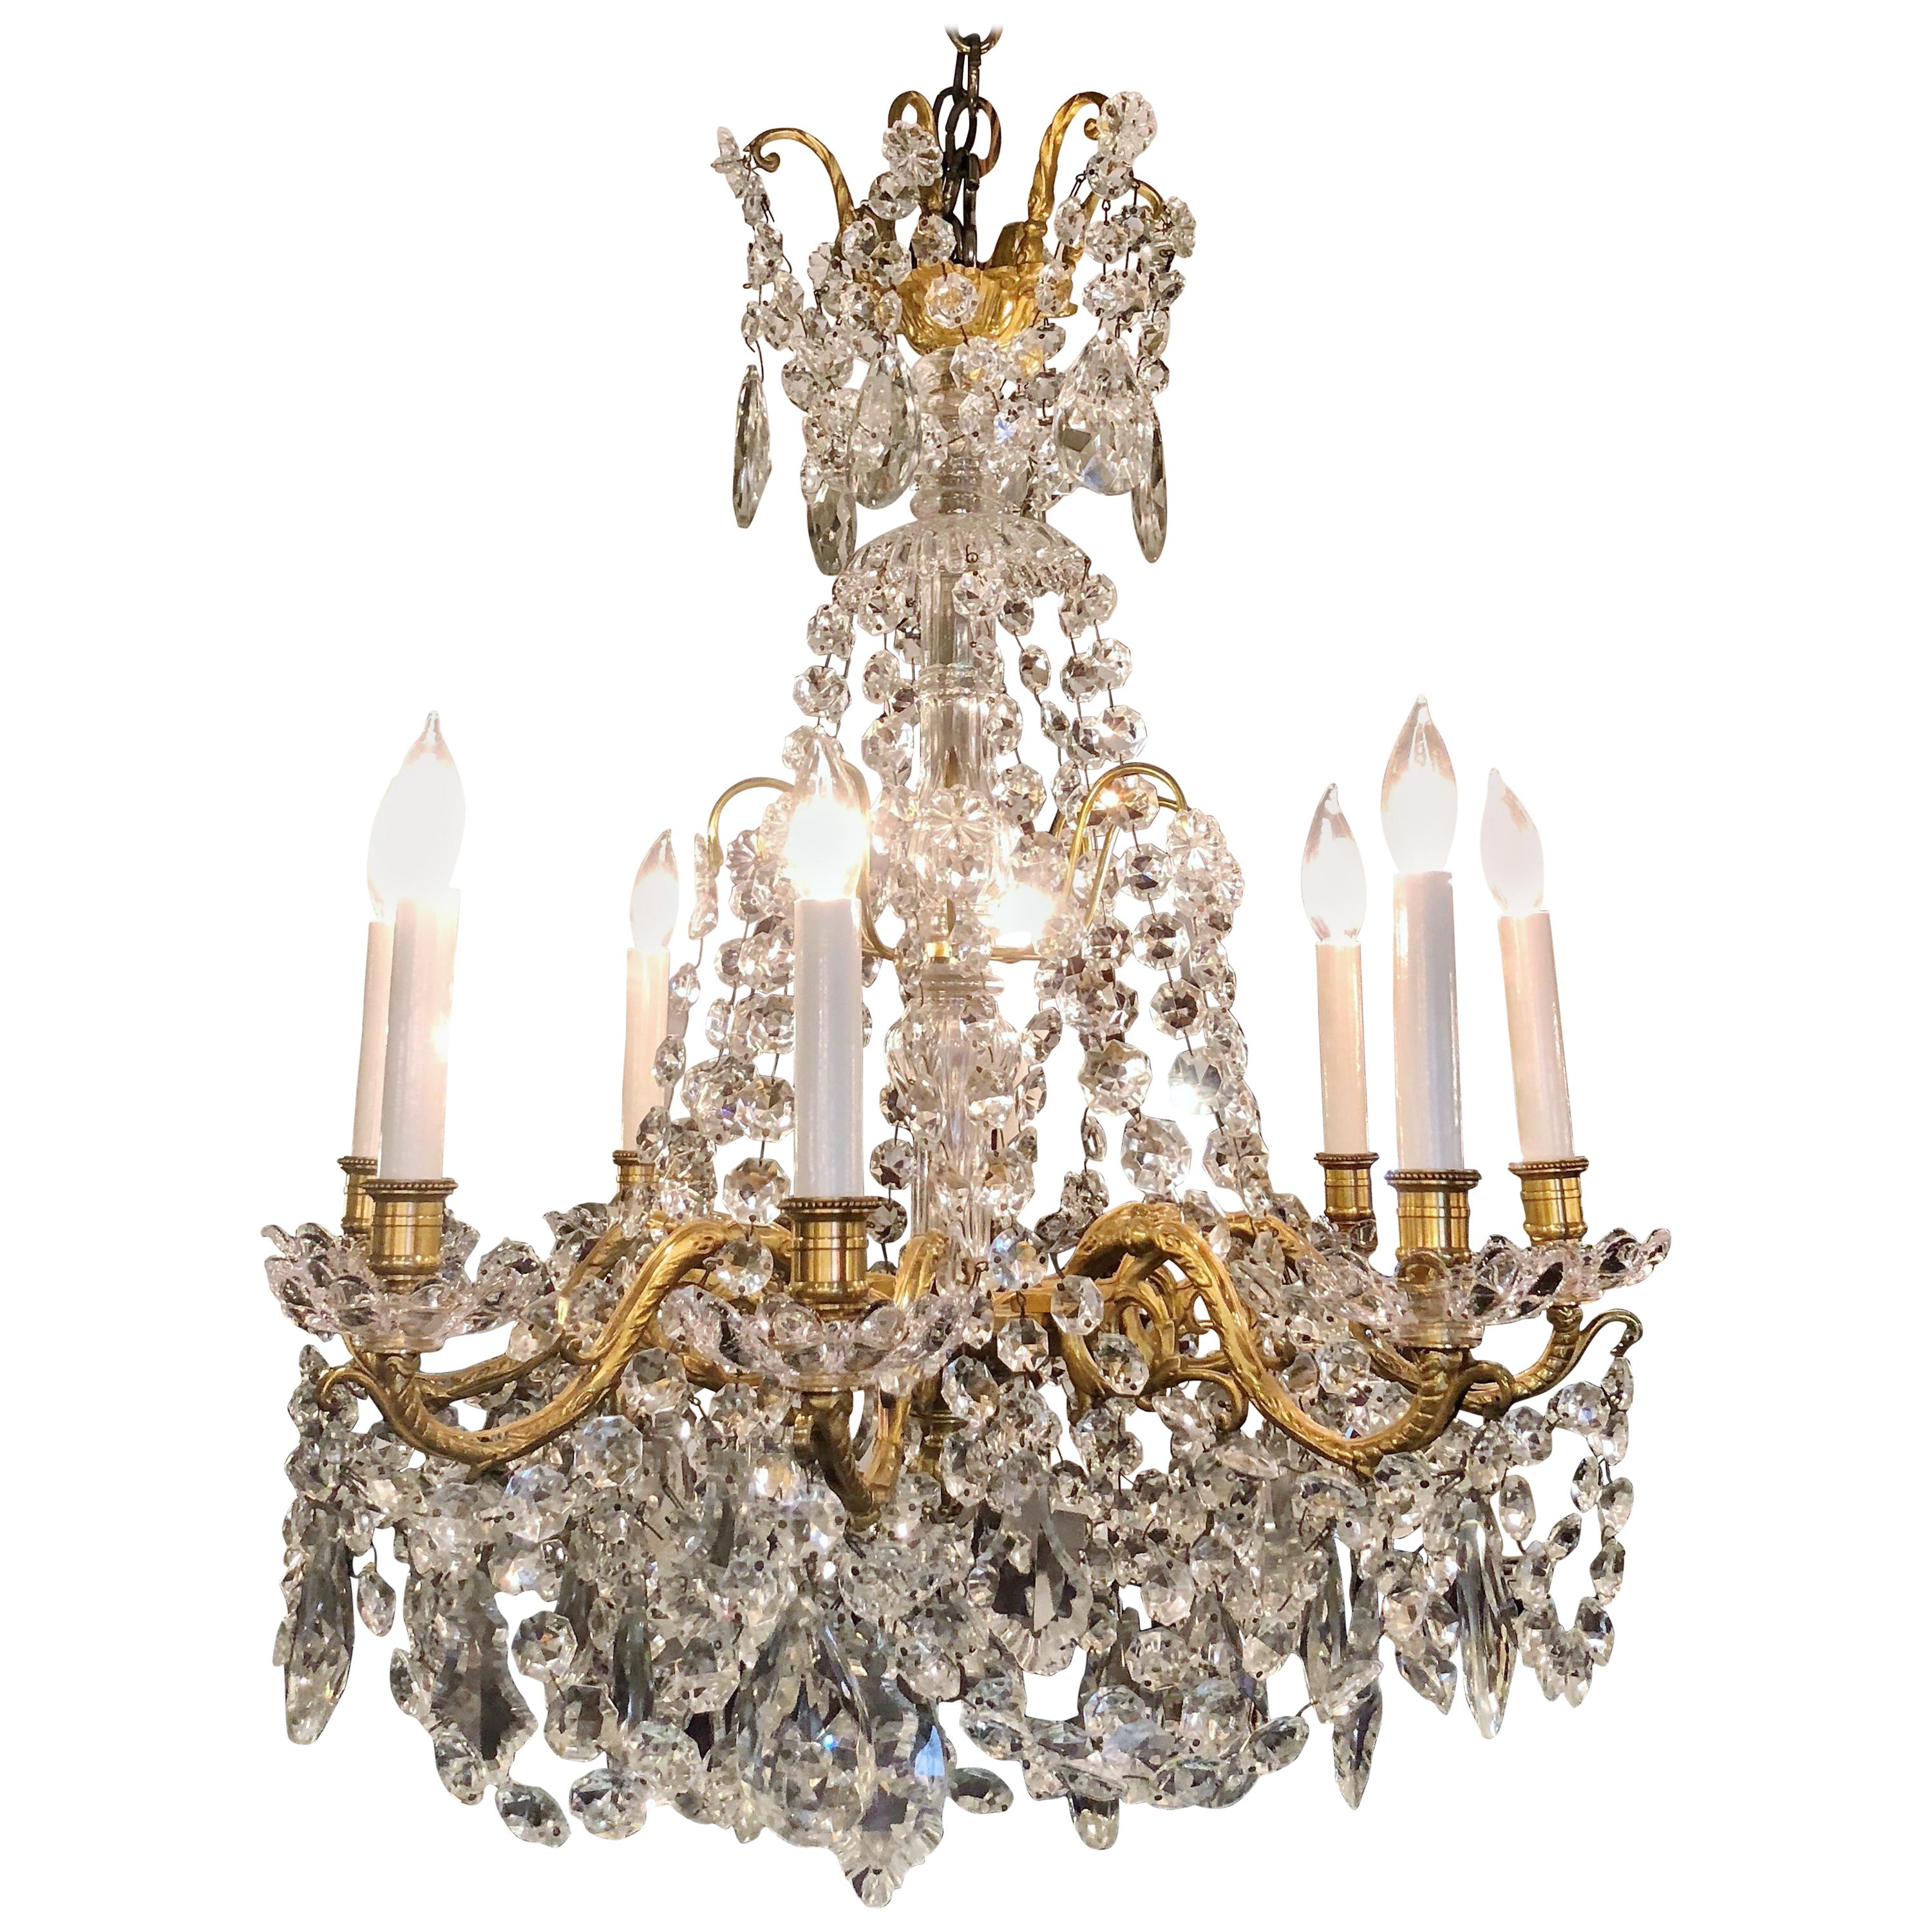 Estate French Bronze Doré and Crystal 8-Light Chandelier, circa 1940-1950